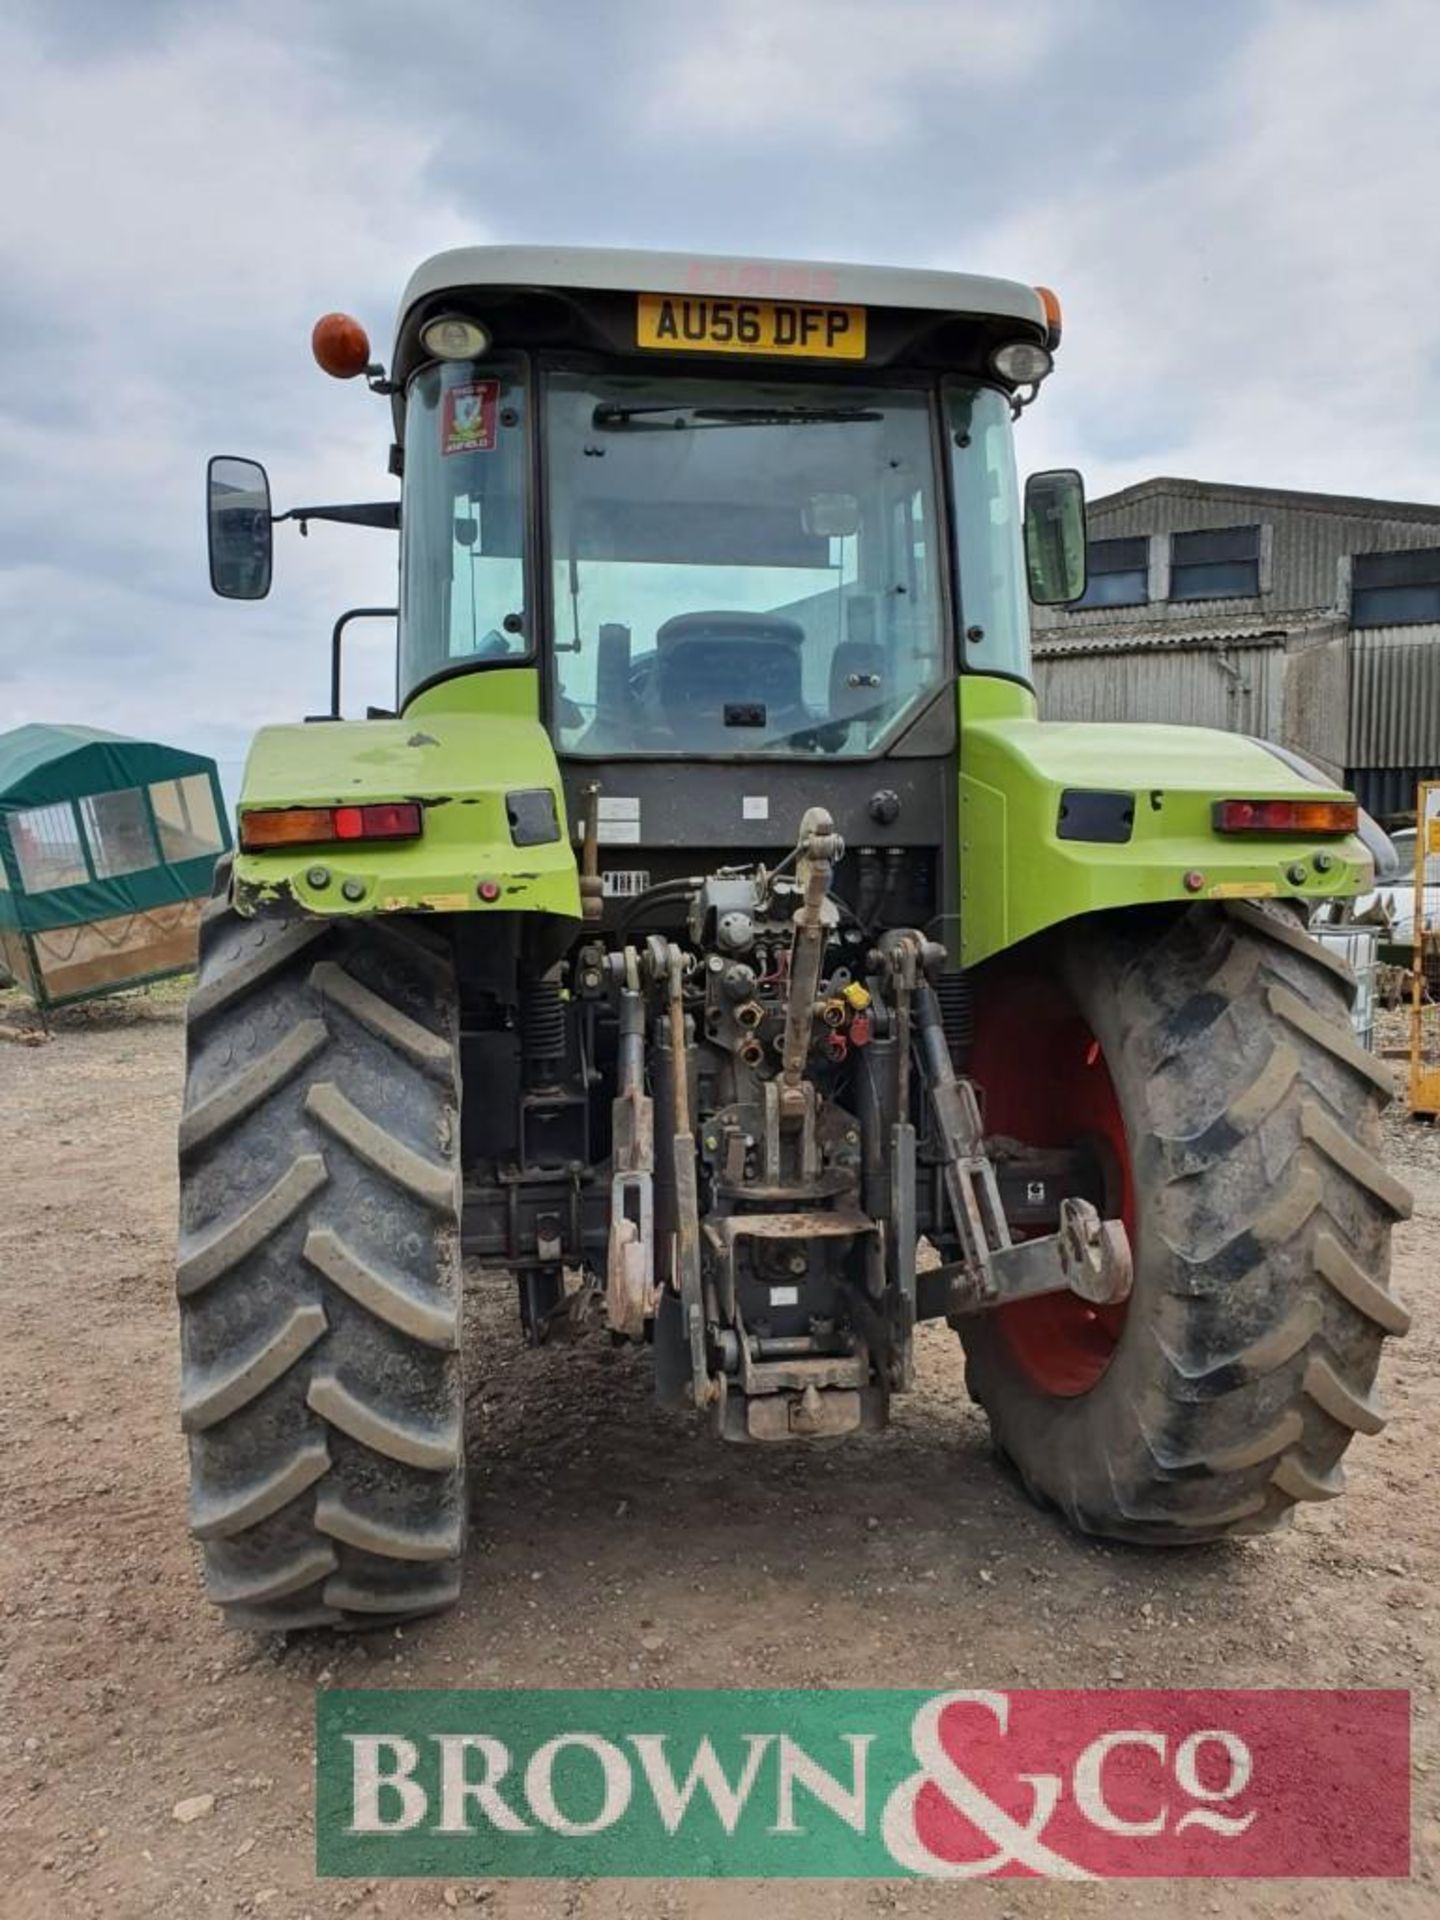 2006 Claas 657 Ares ATZ Tractor - Image 2 of 10